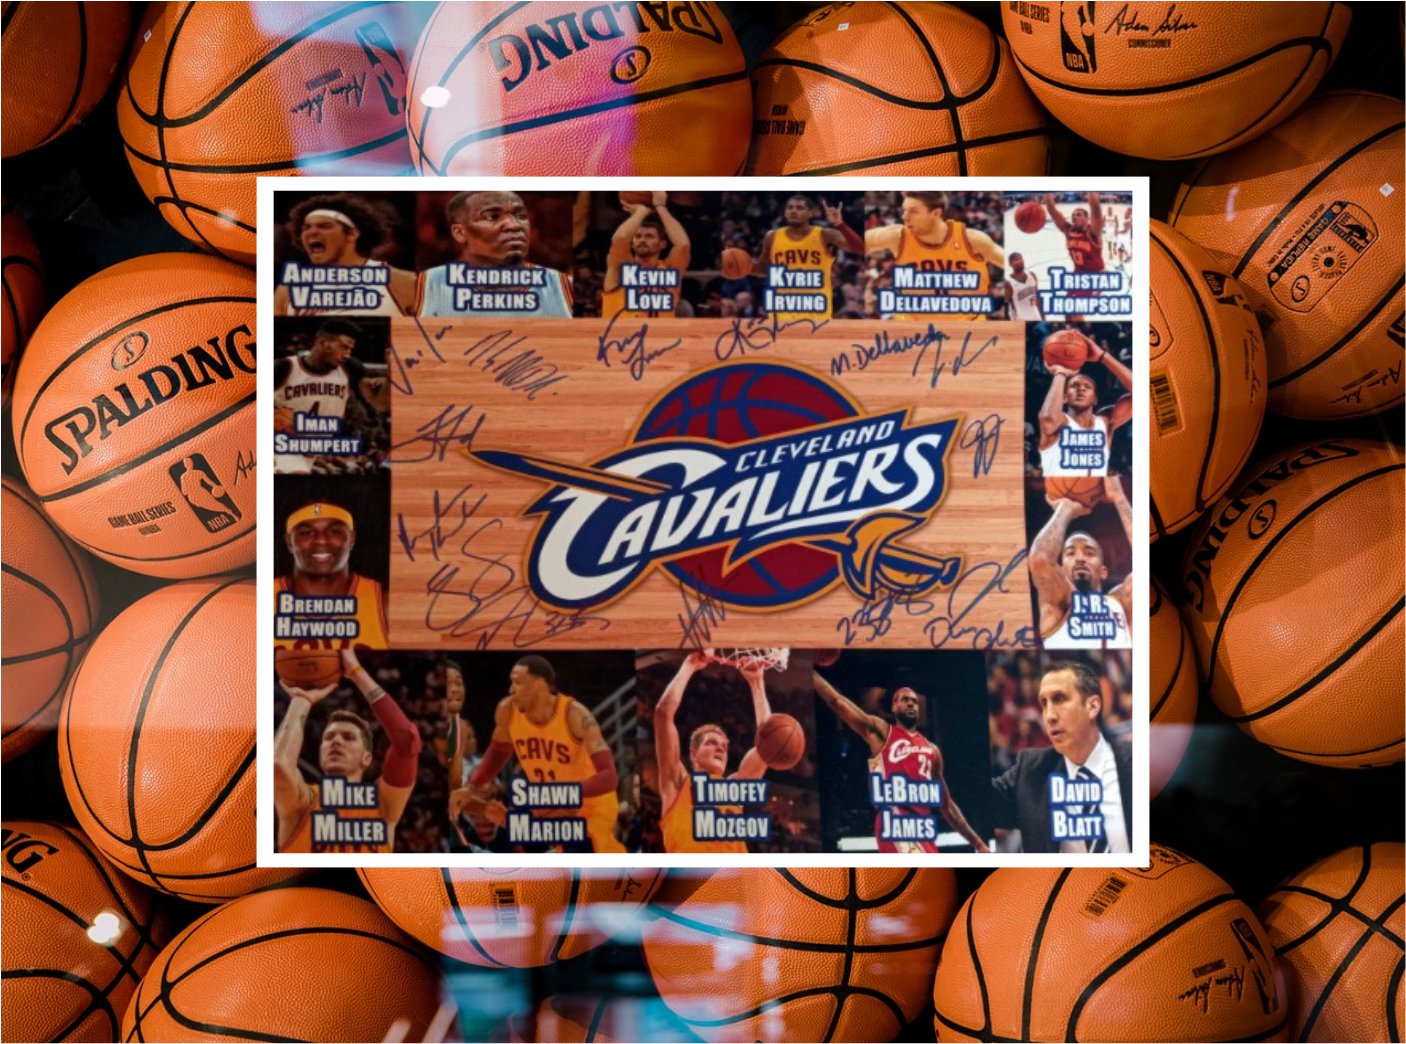 Kyrie Irving Kevin Love LeBron James Anderson Varejao Cleveland Cavaliers 16 x 20 team signed photo